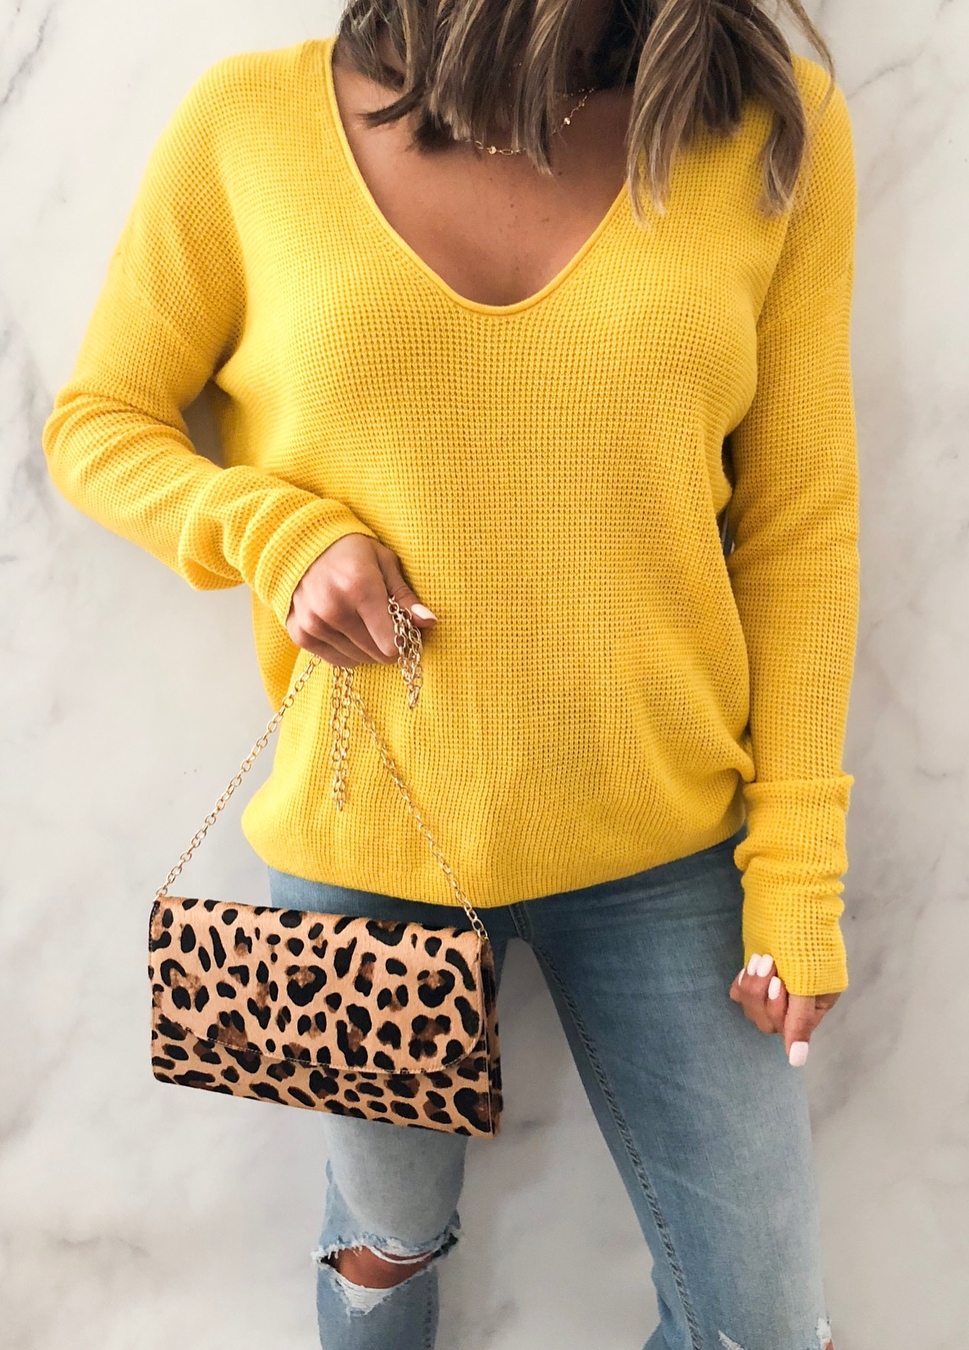 how to style a leopard bag : yellow v-neck sweater + skinnies